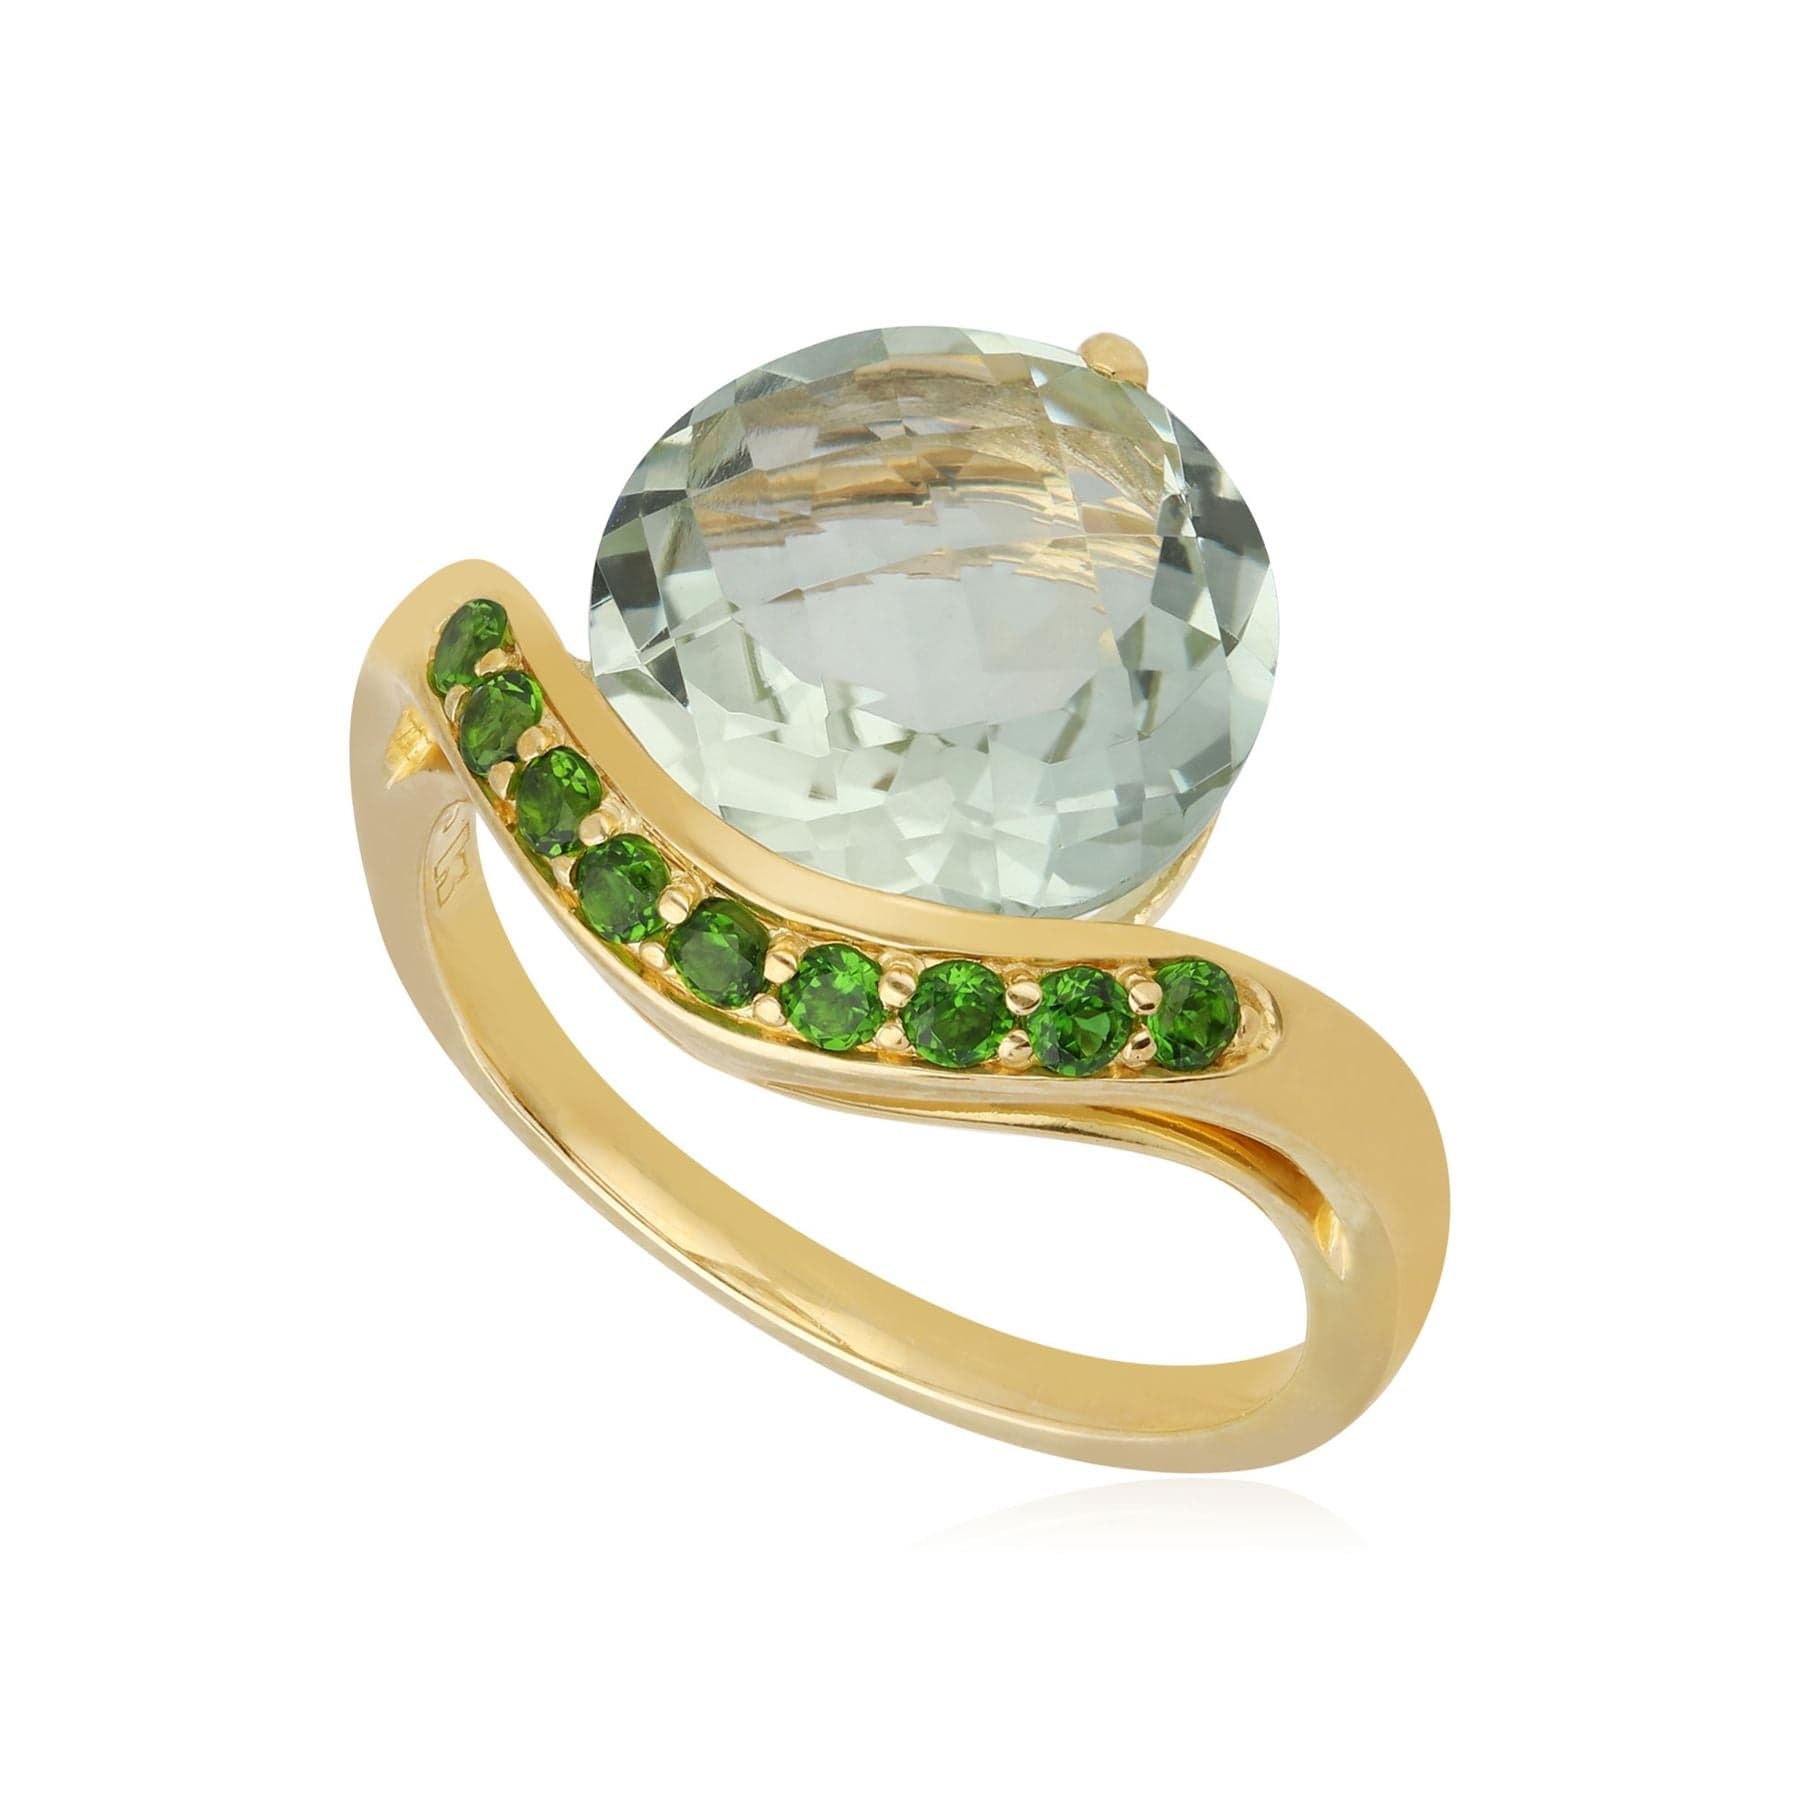 T0940R40X4 Kosmos Green Mint Quartz & Chrome Diopside Cocktail Ring in 9ct Yellow Gold 1